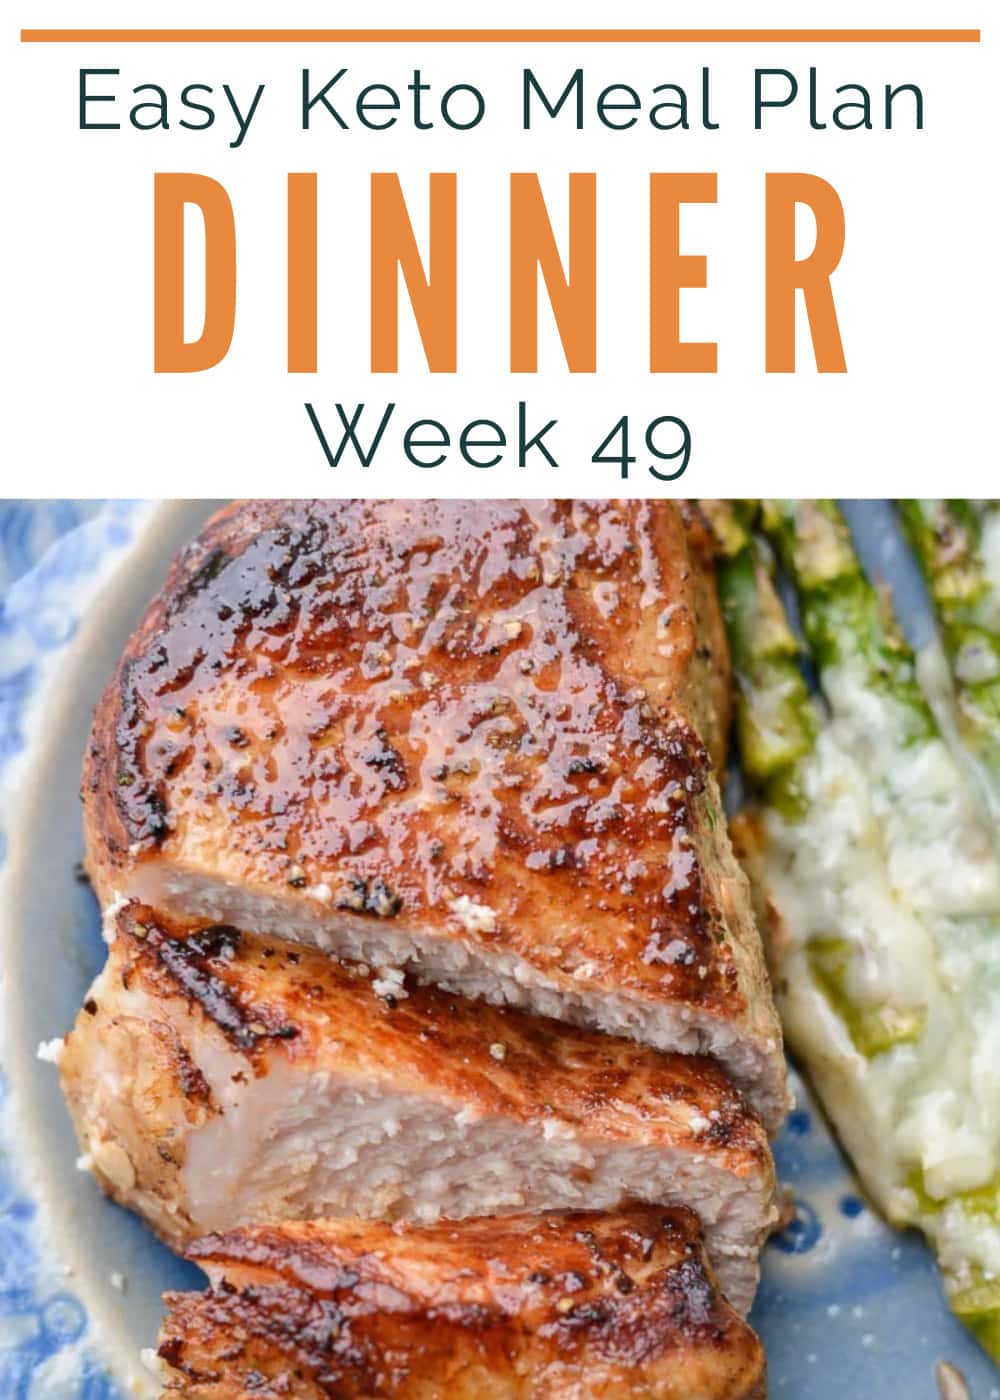 This week's Keto Meal Plan has 5 delicious keto weeknight meals! Included is a printable shopping list, meal prep tips, and two bonus meal prep snacks!